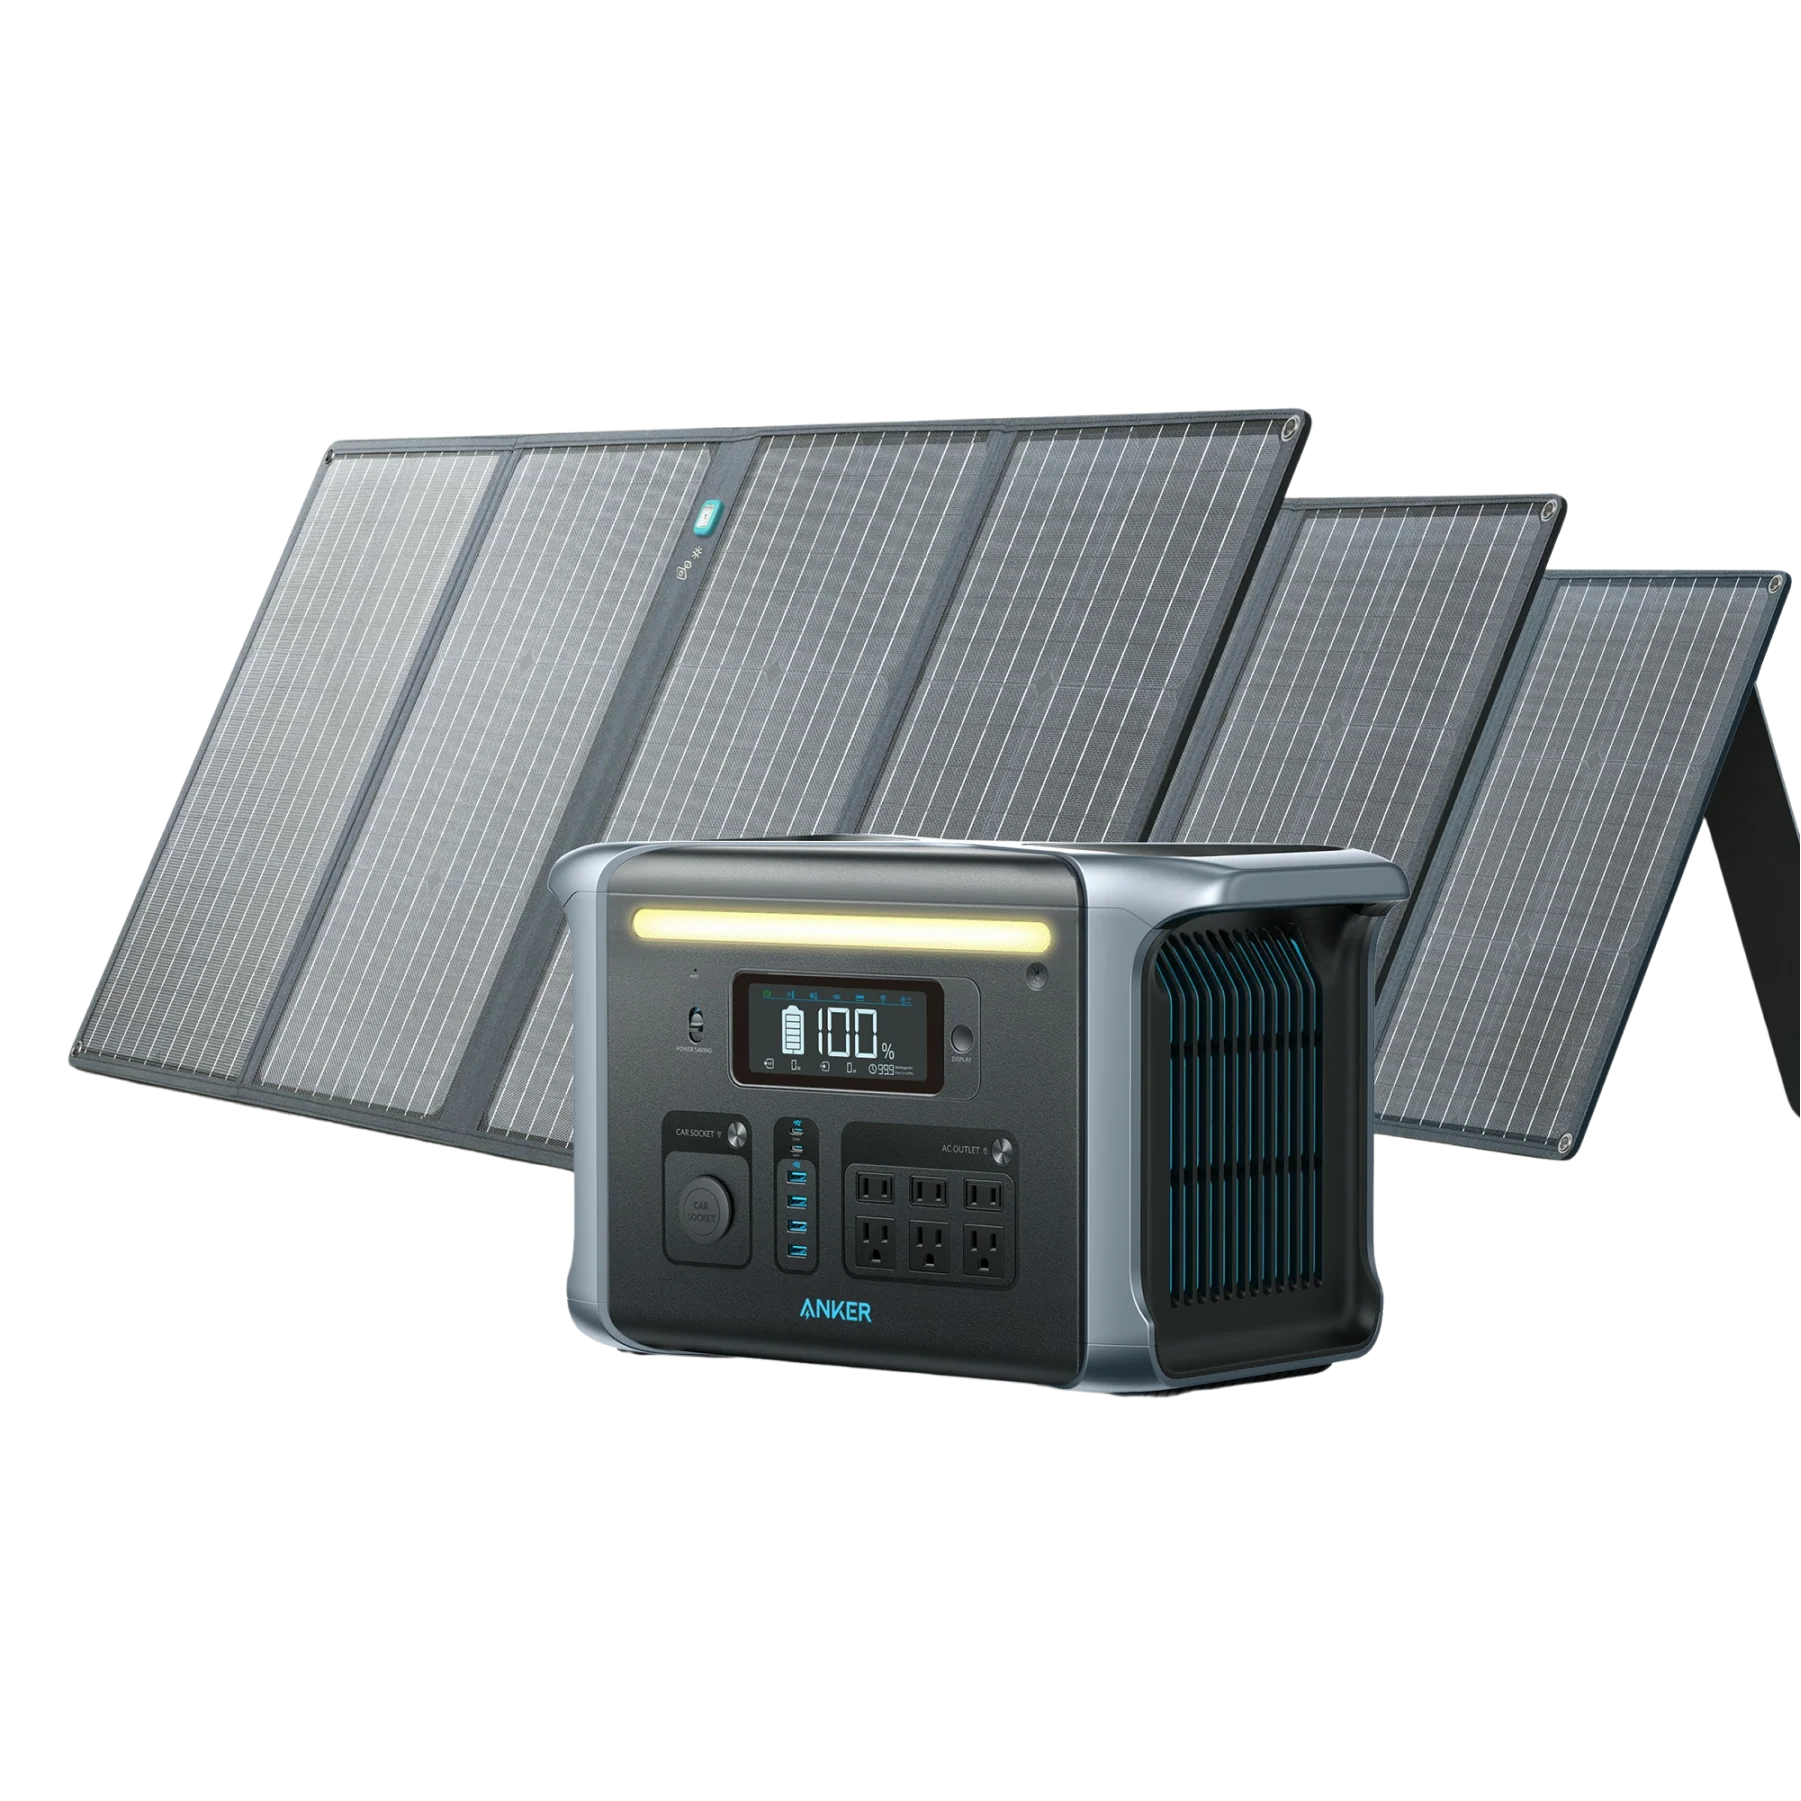 A solar panel with a clock and a radio is essential for emergency food storage.